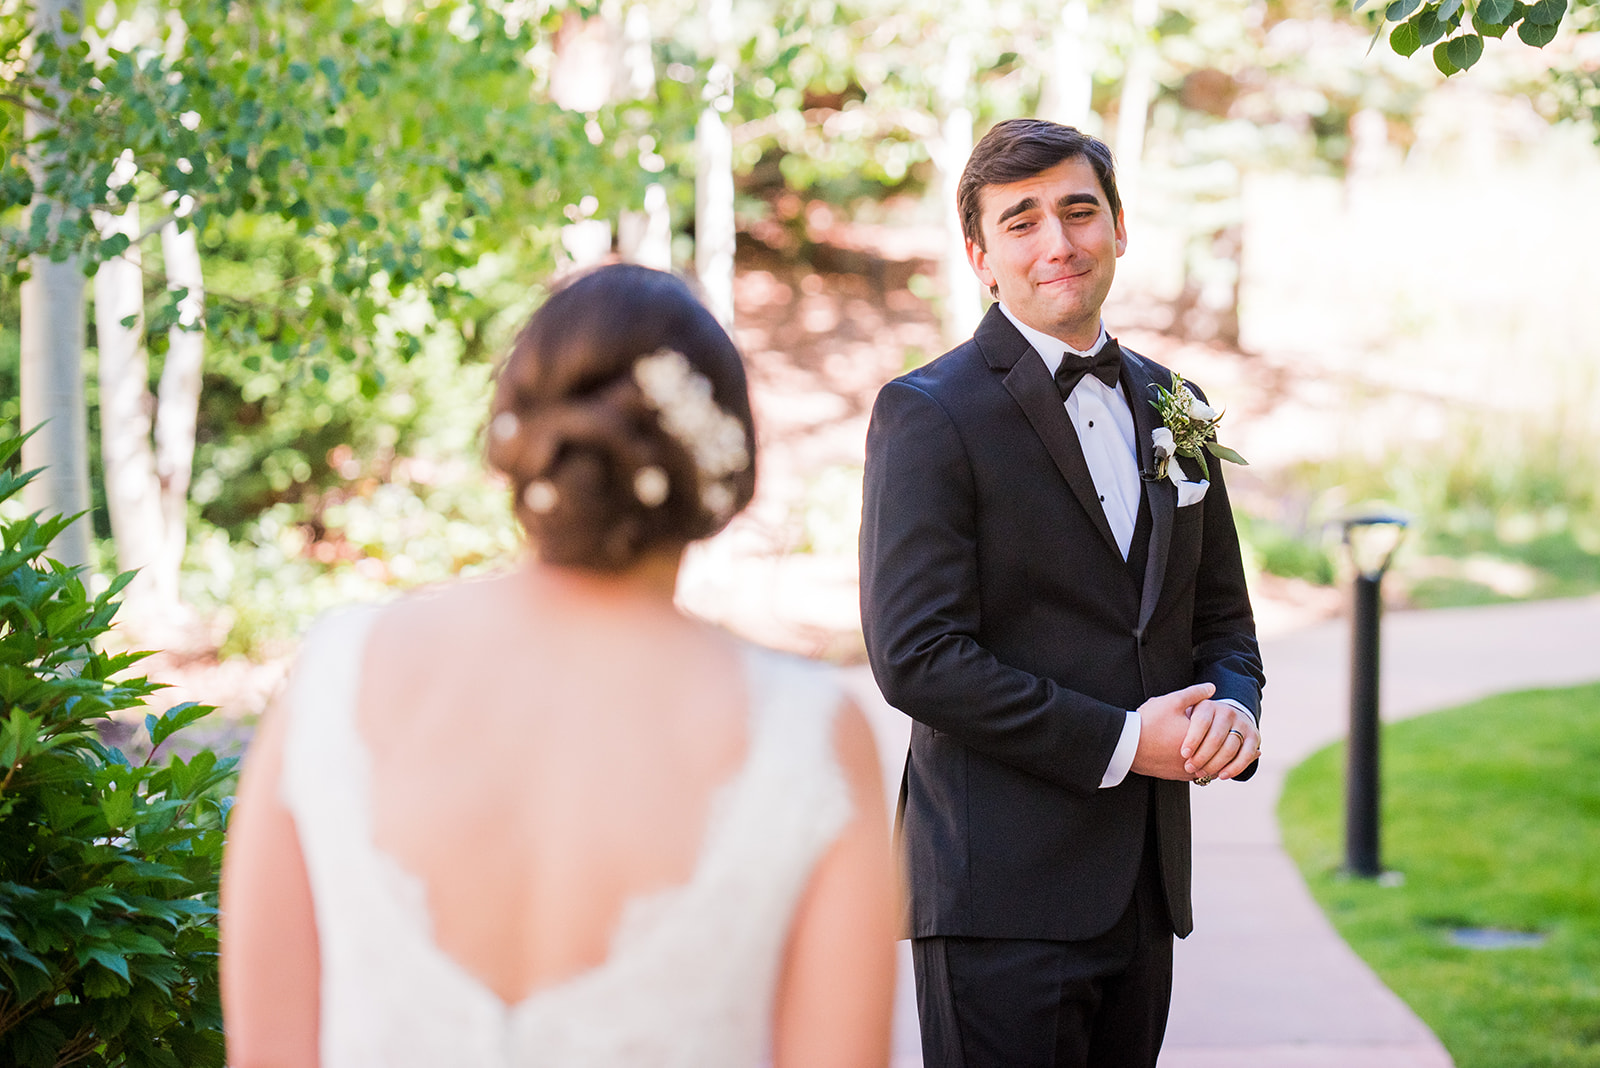 Groom gazes at bride with emotion during first look.